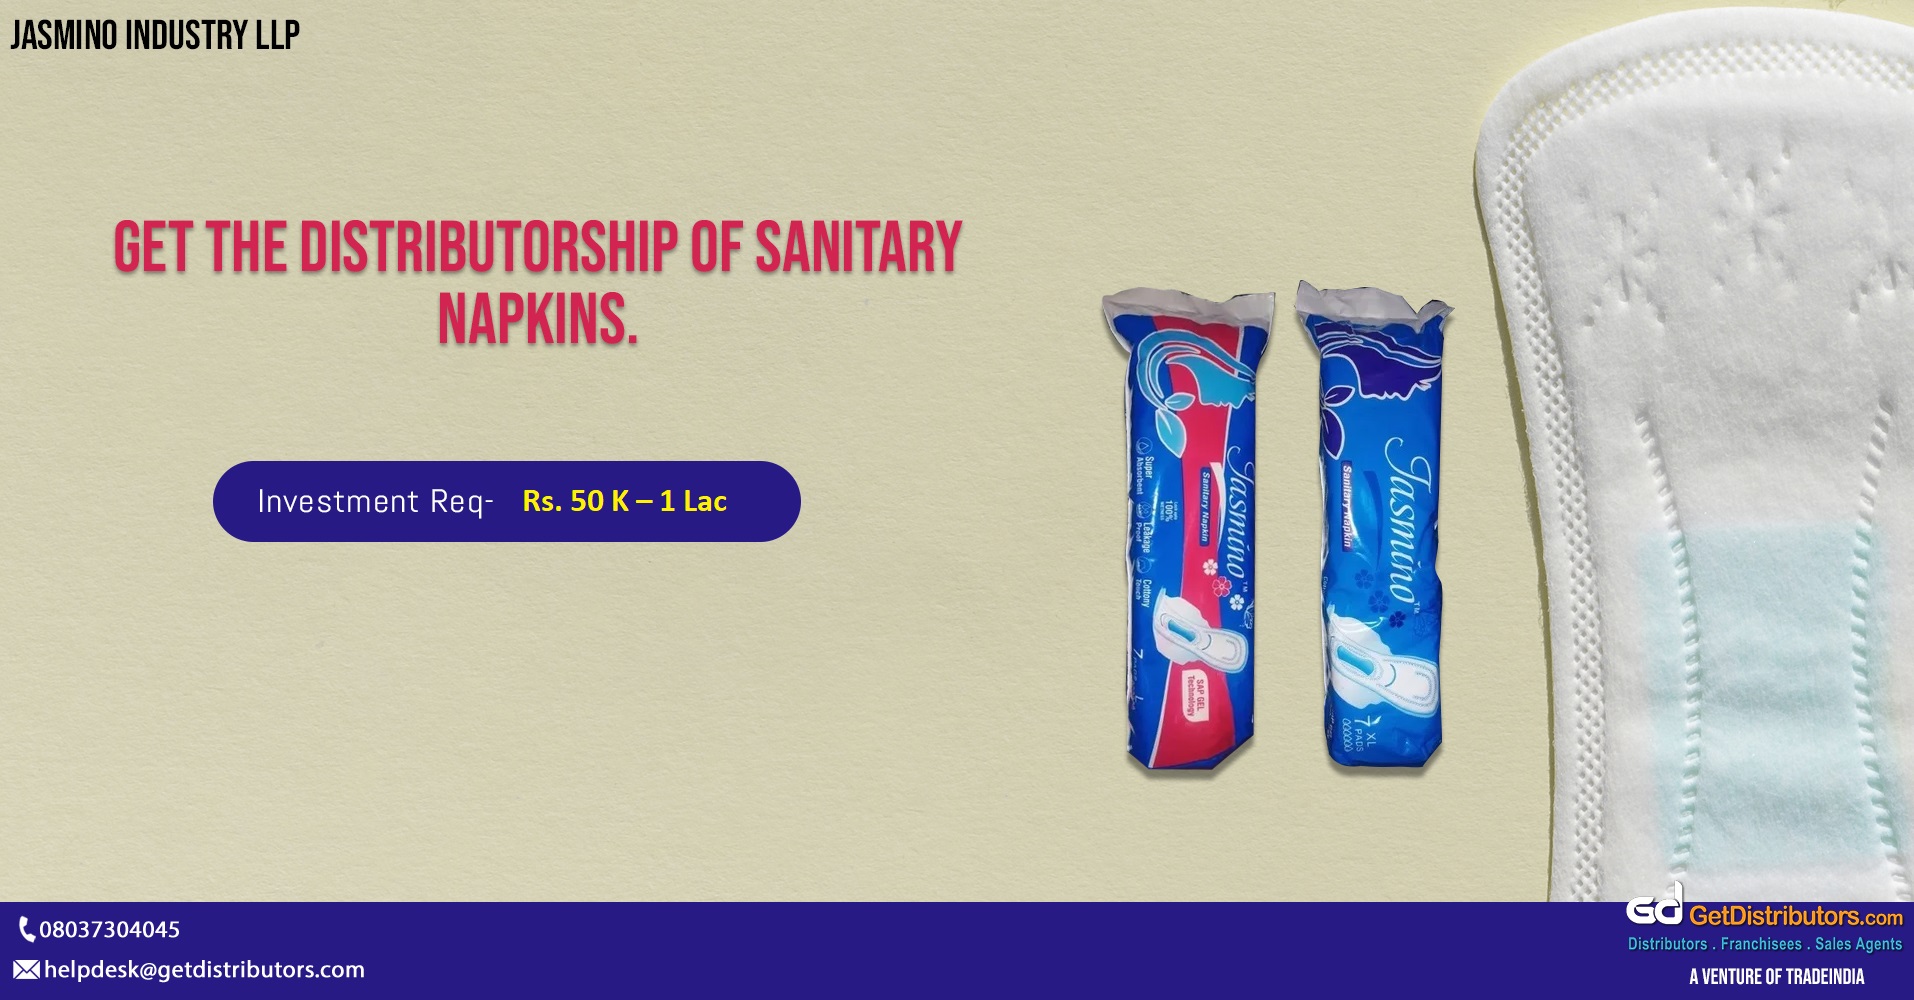 An extensive range of sanitary napkins at cost-effective rates